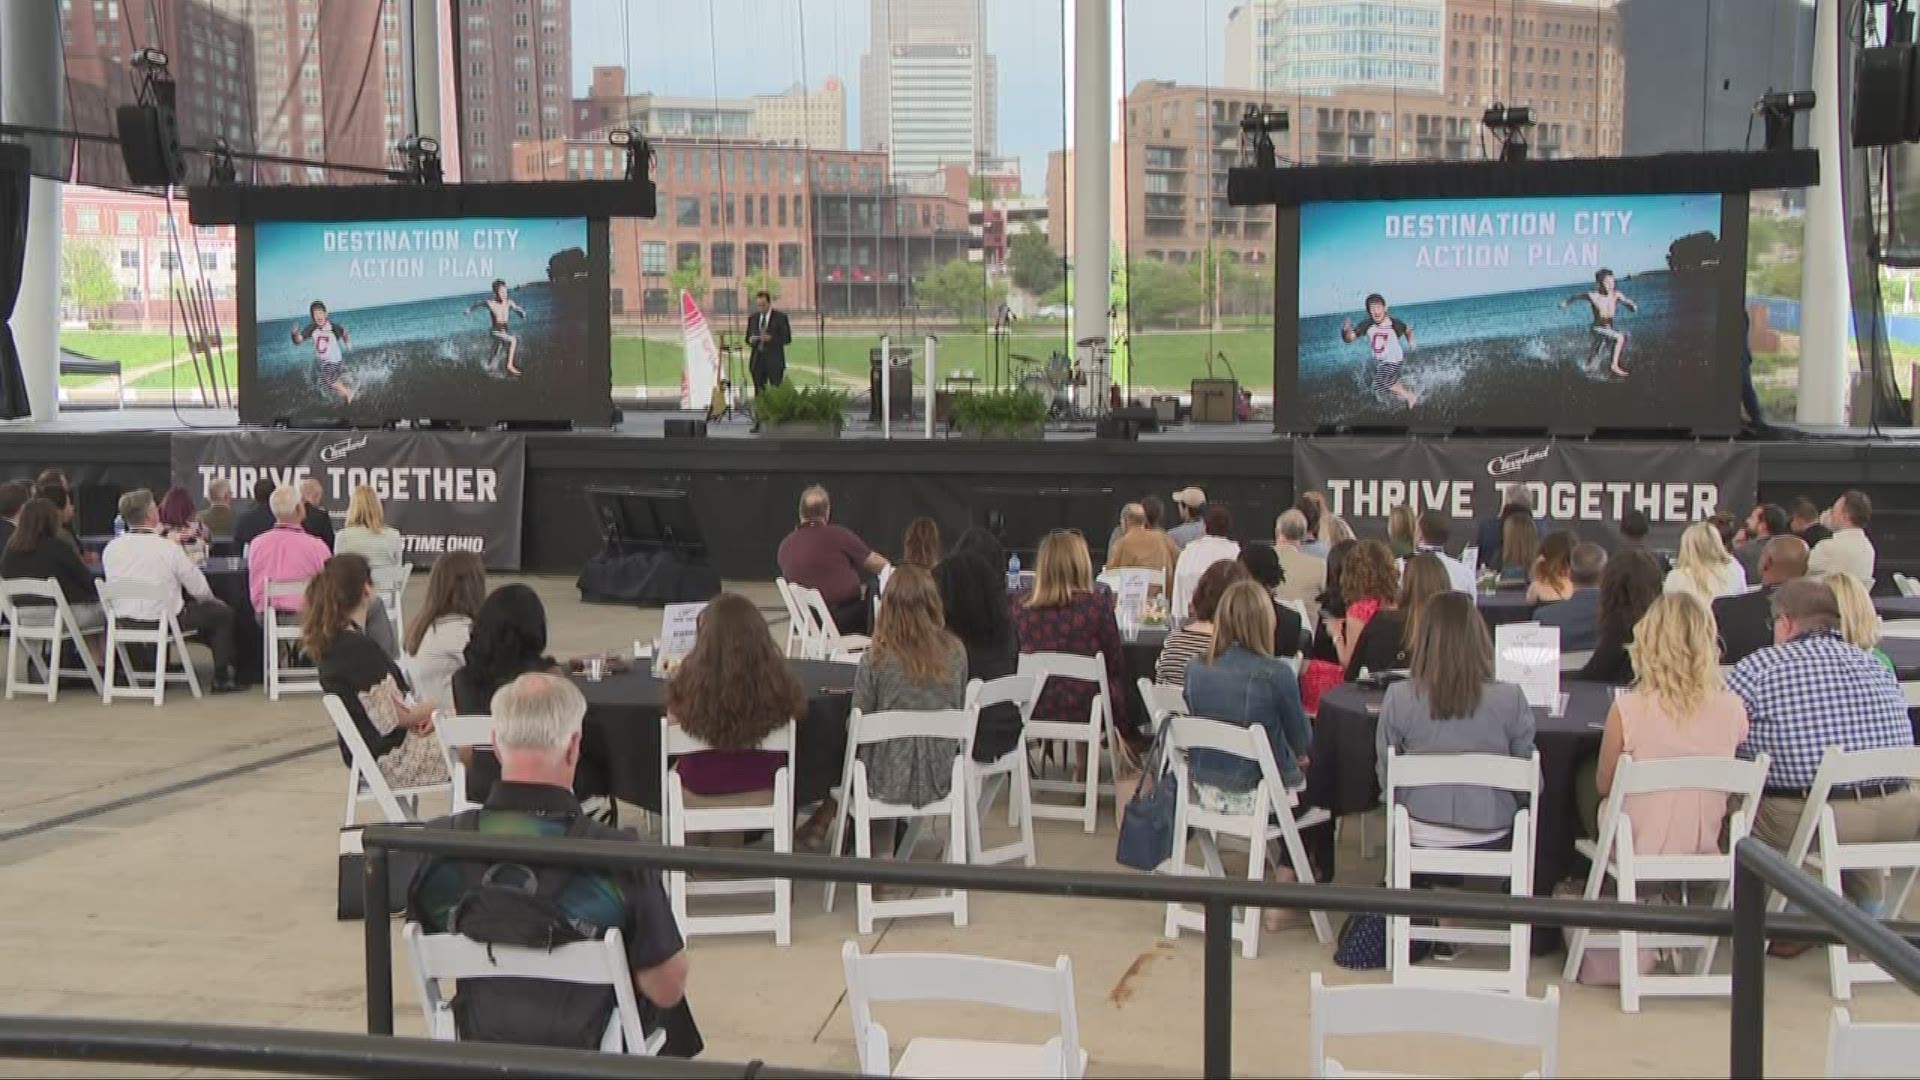 Destination Cleveland holds annual meeting, lays out goals for future